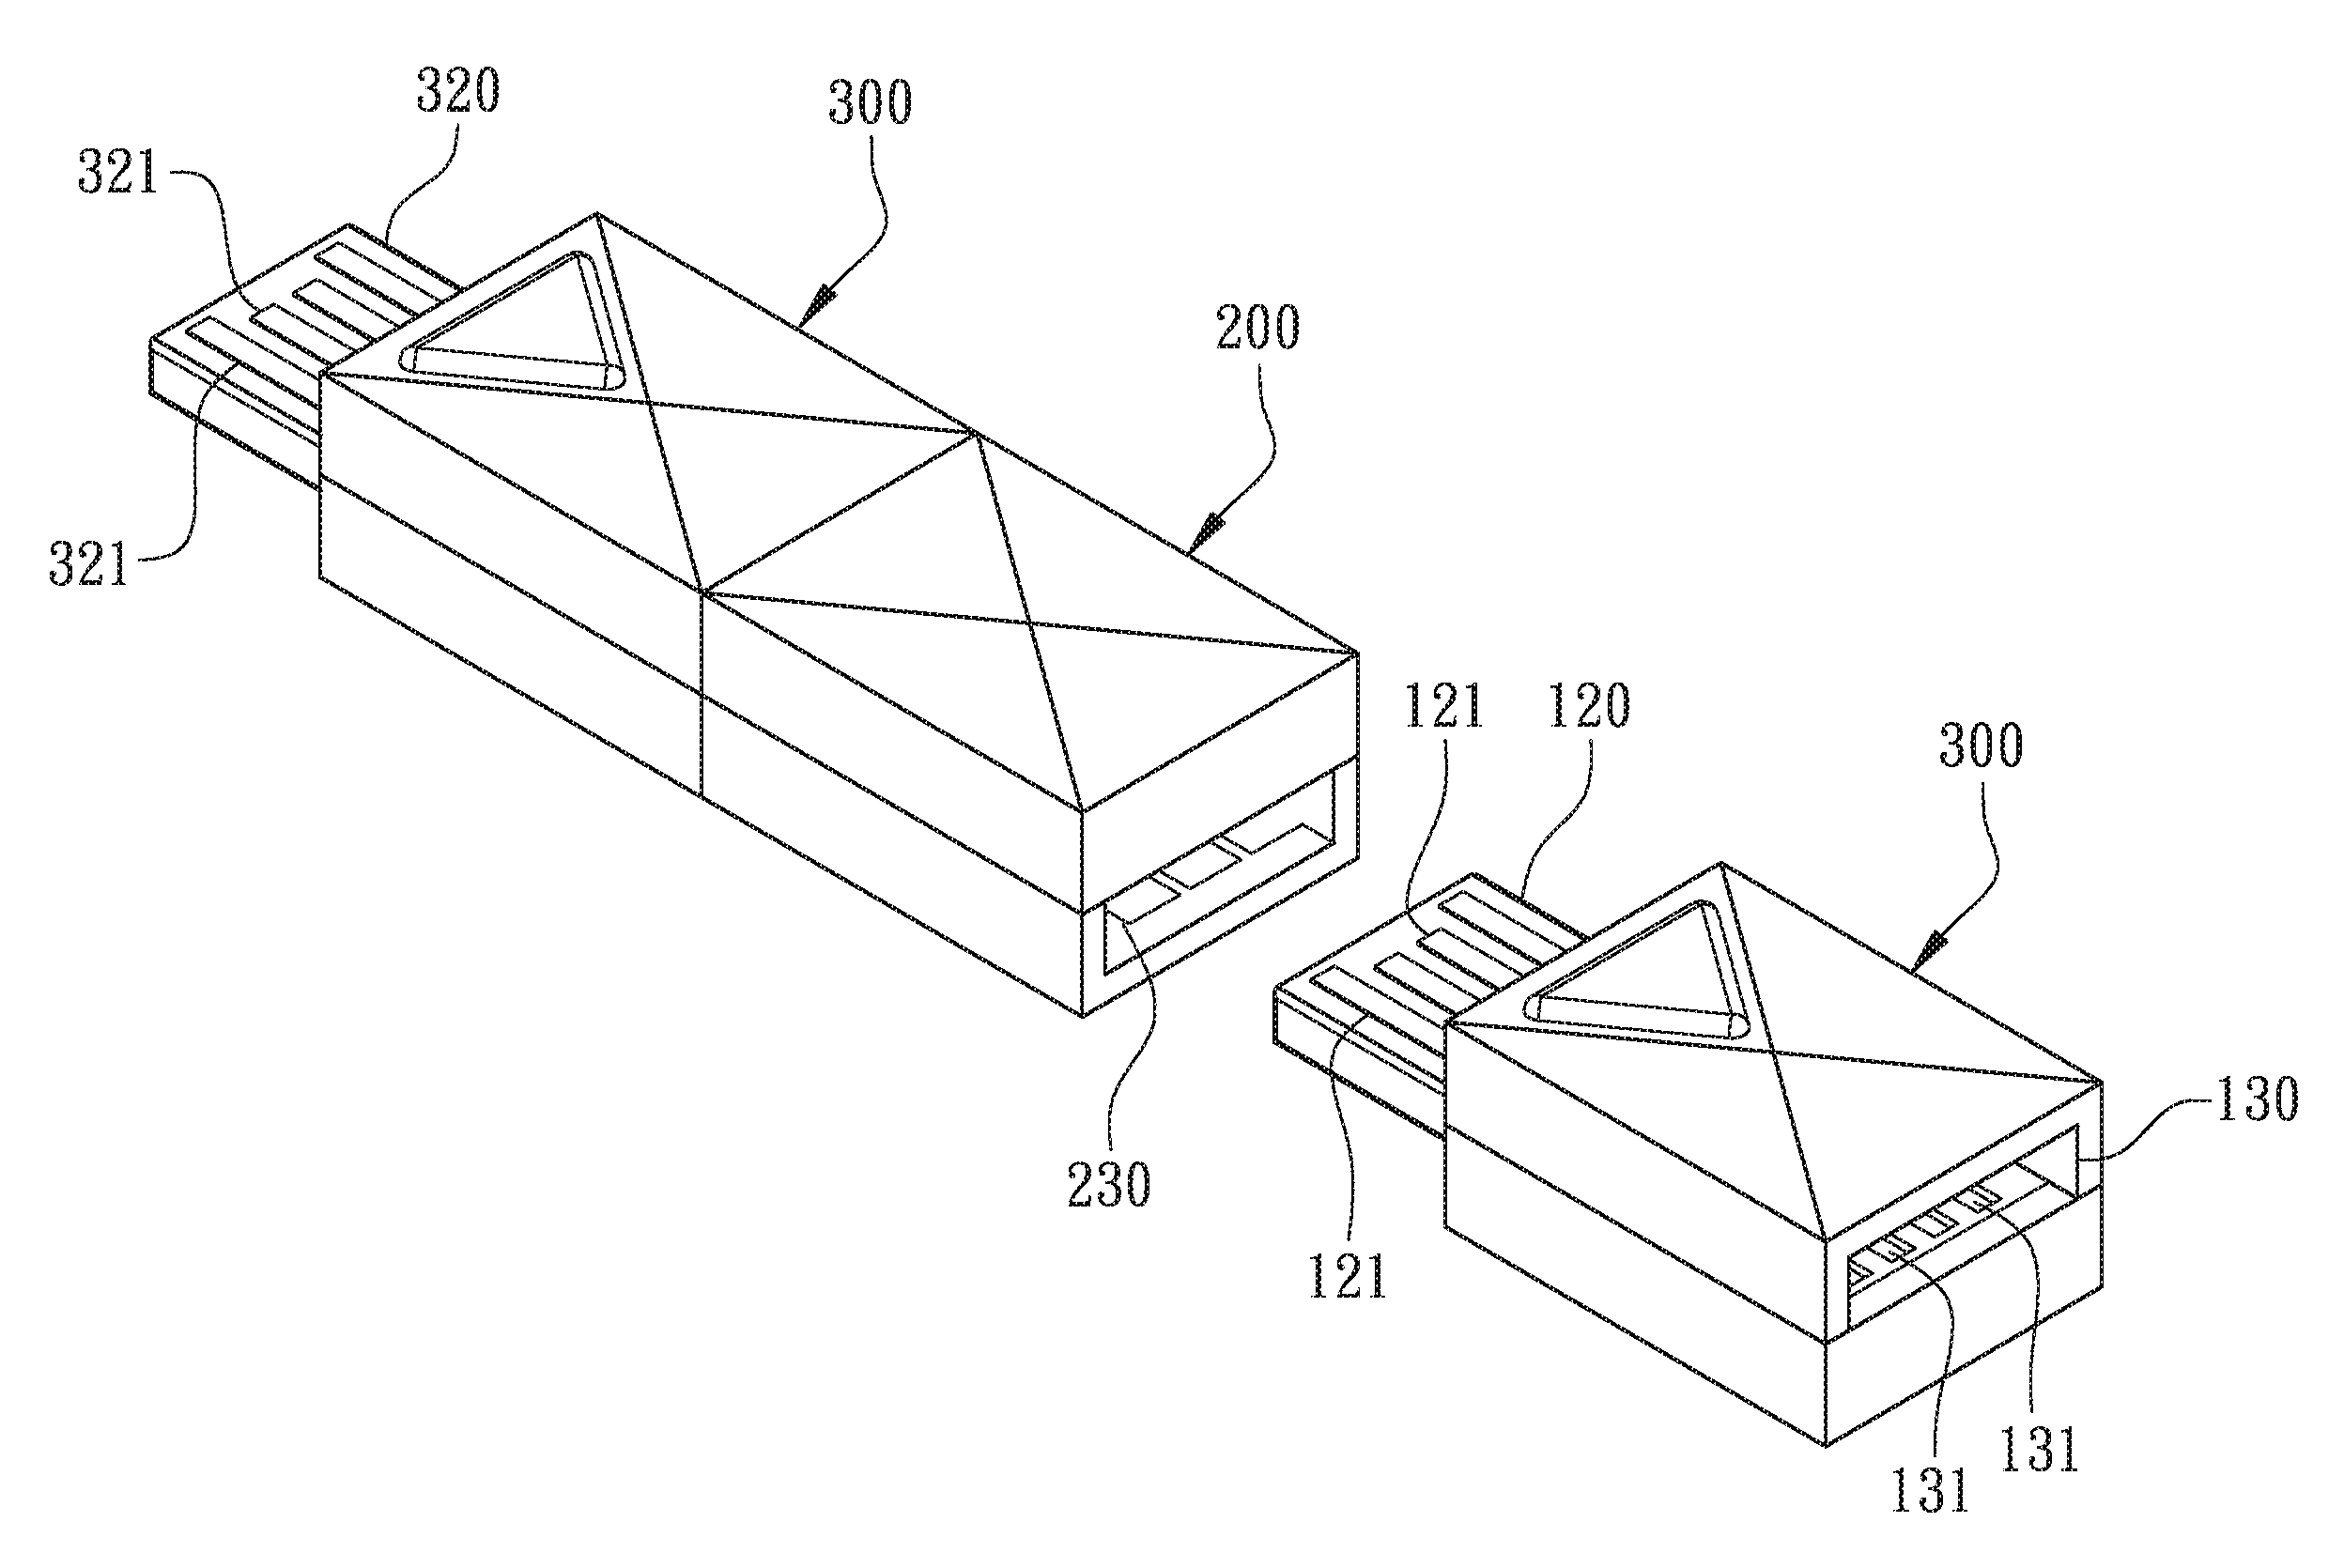 Method for employing USB record carriers and a related module